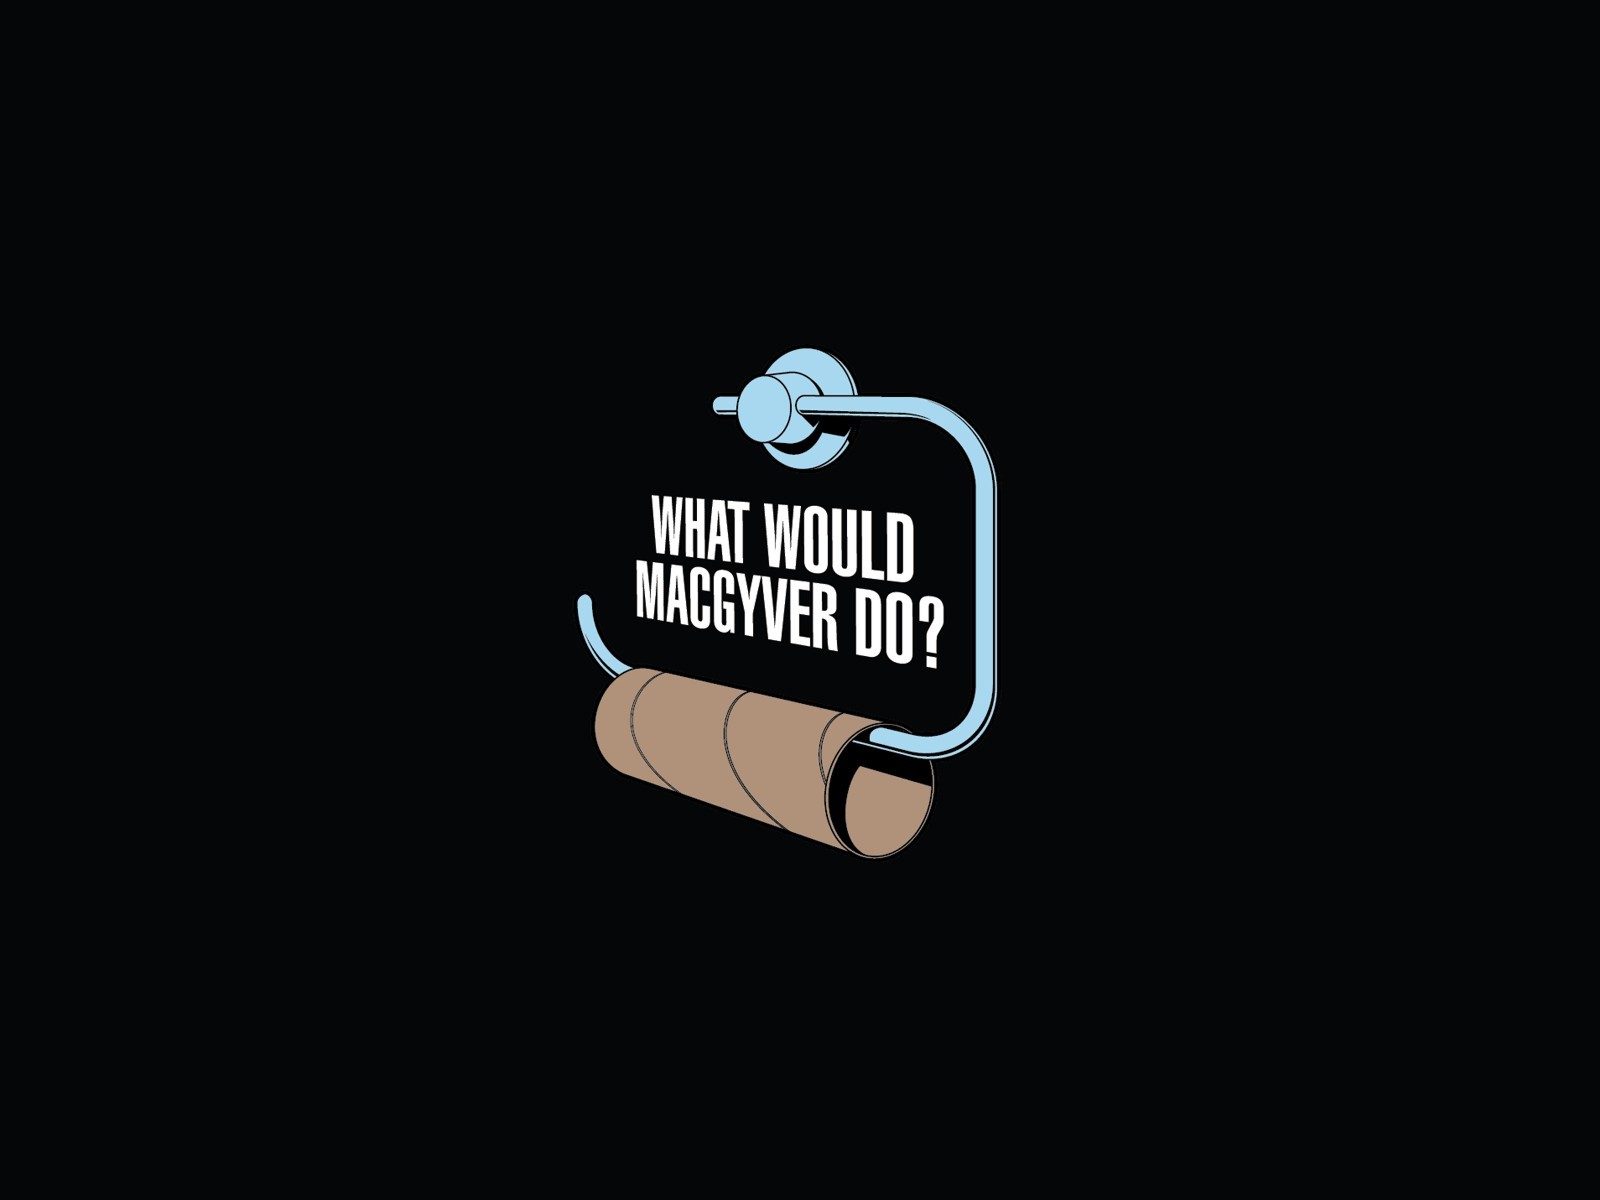 black, Minimalistic, Toilet, Paper, Macgyver, What, Would Wallpaper